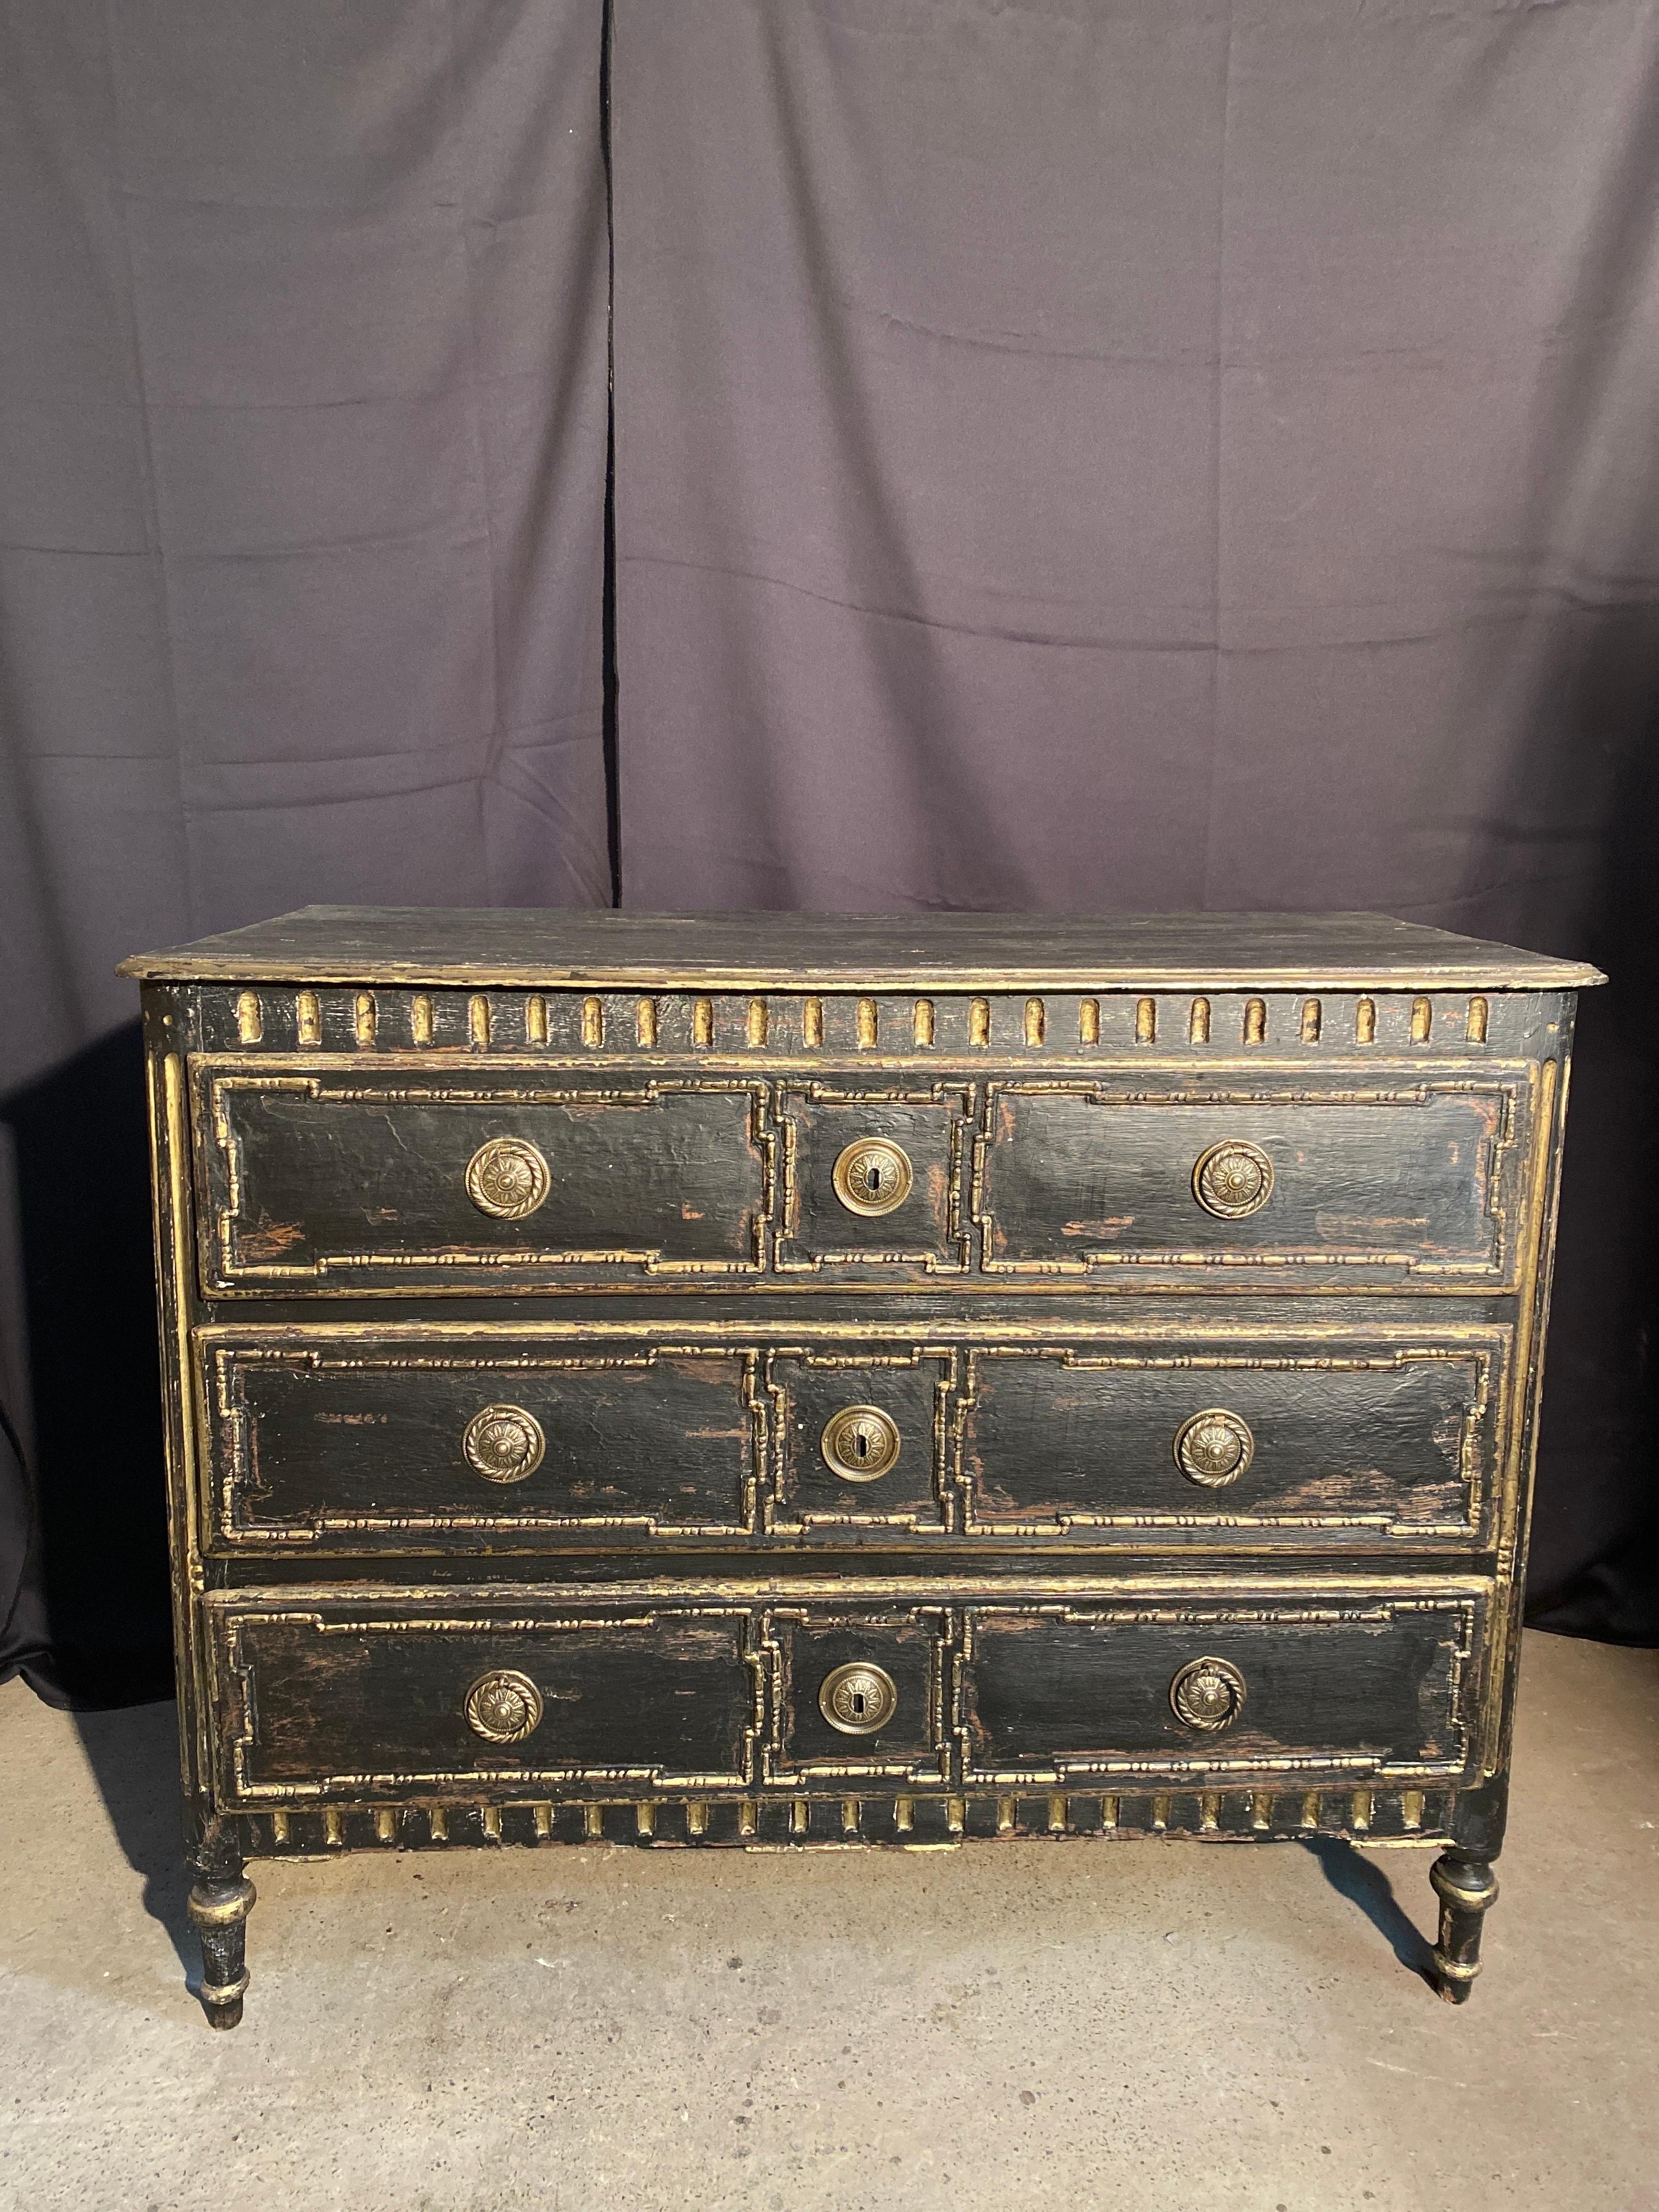 magnificent Louis xvi chest of drawers dating from the 19th century, nicely patinated in two colors opening with 3 drawers